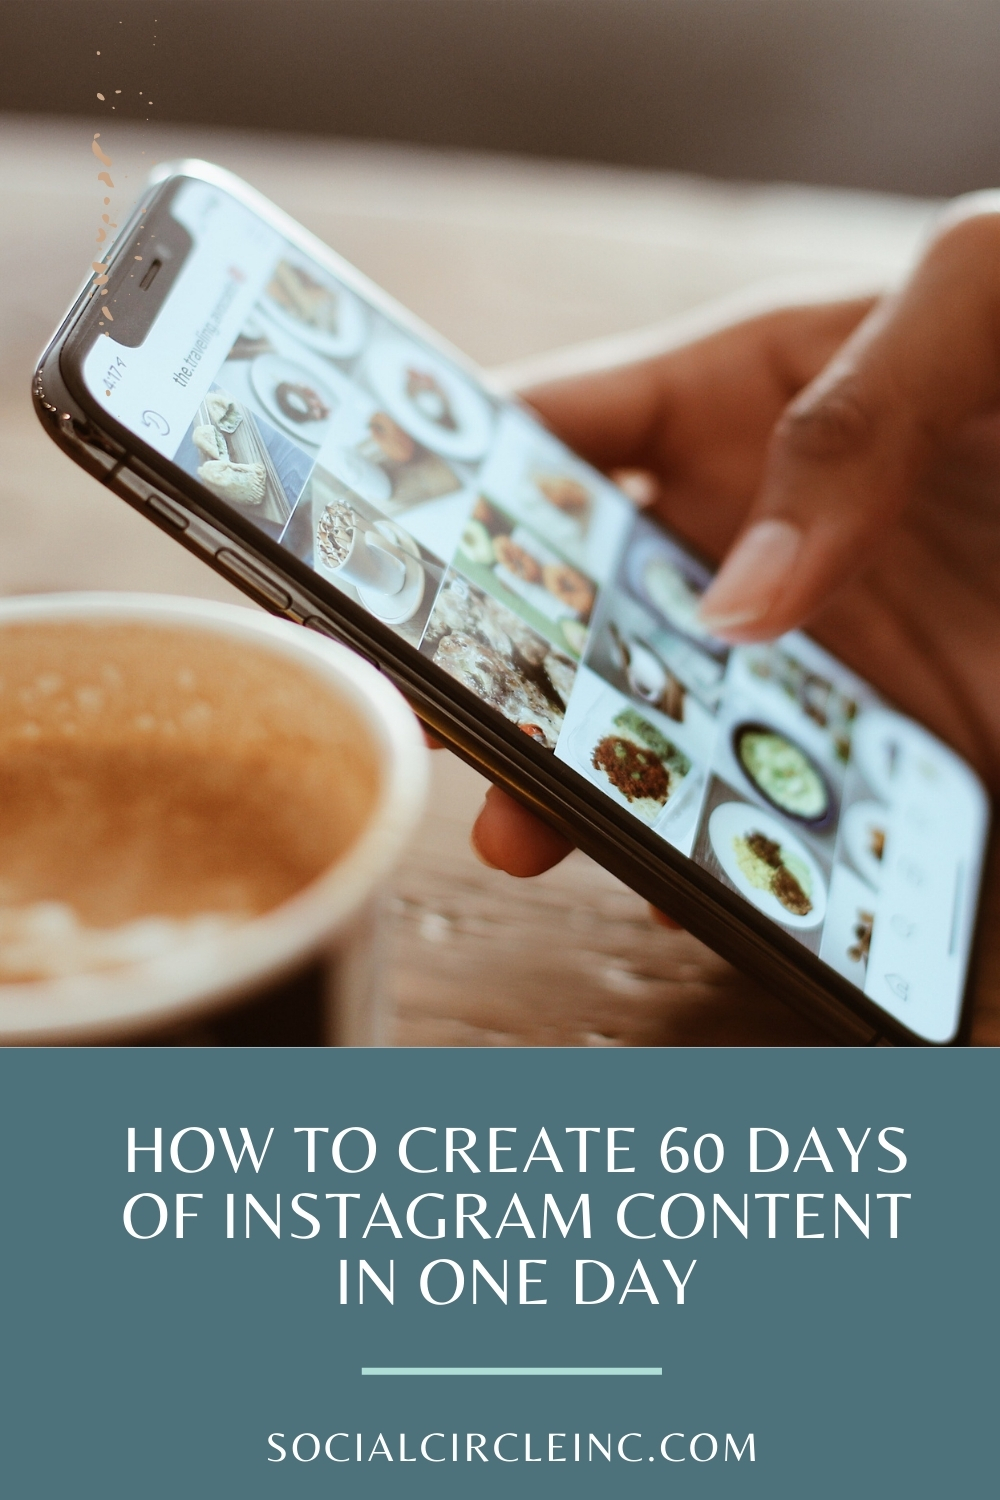 How to Create 60 Days of Instagram Content in One Day